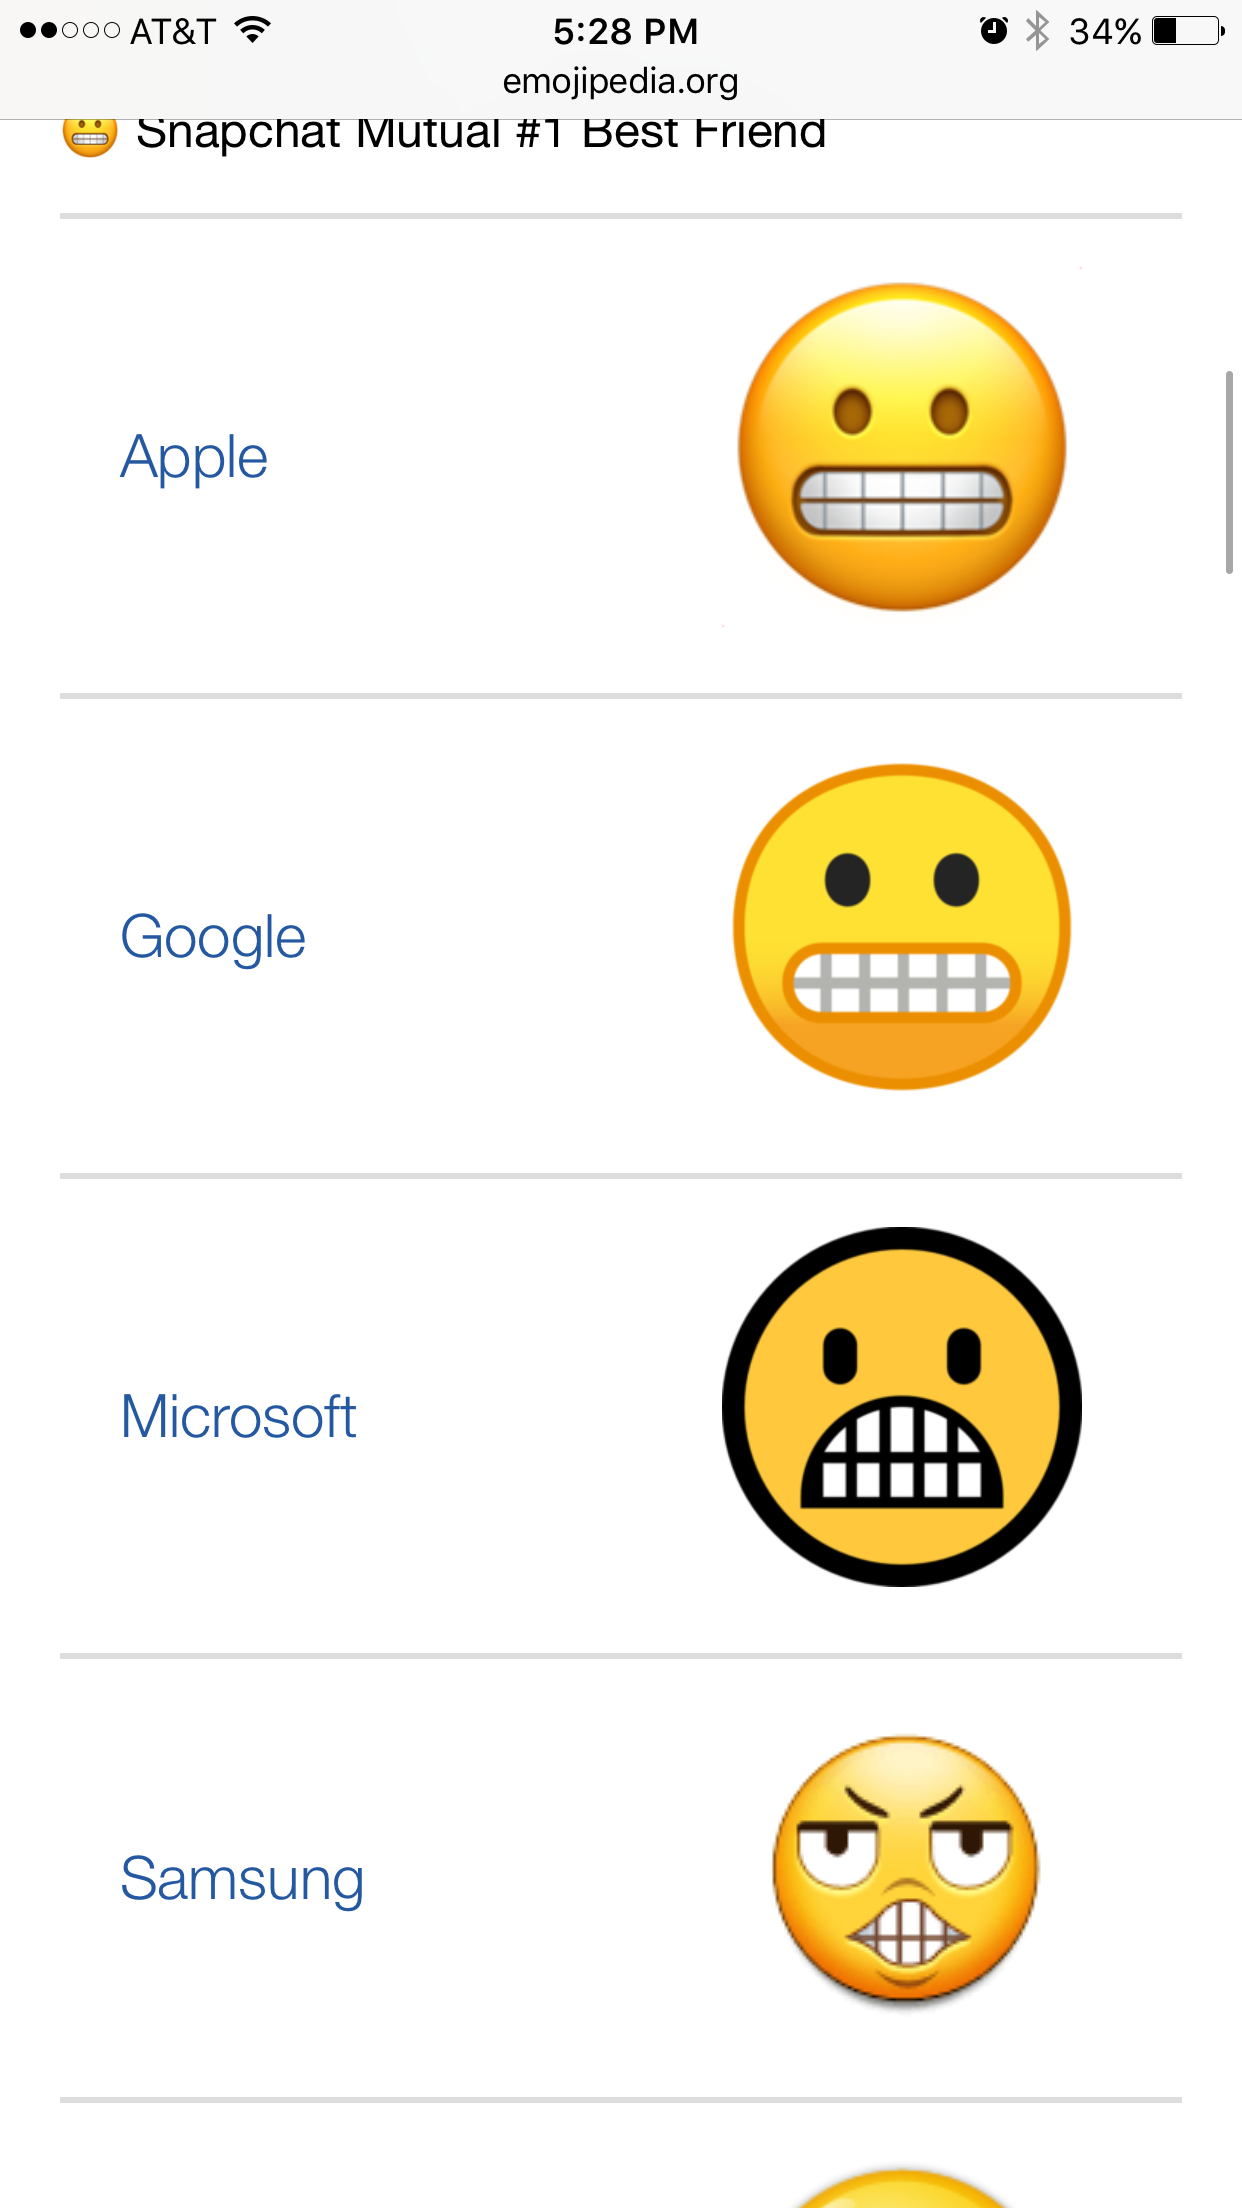 you really nailed a grimace samsung - 34%D .00 At&T emojipedia.org Snapchat Mutual Best Friend Apple Google Microsoft Samsung